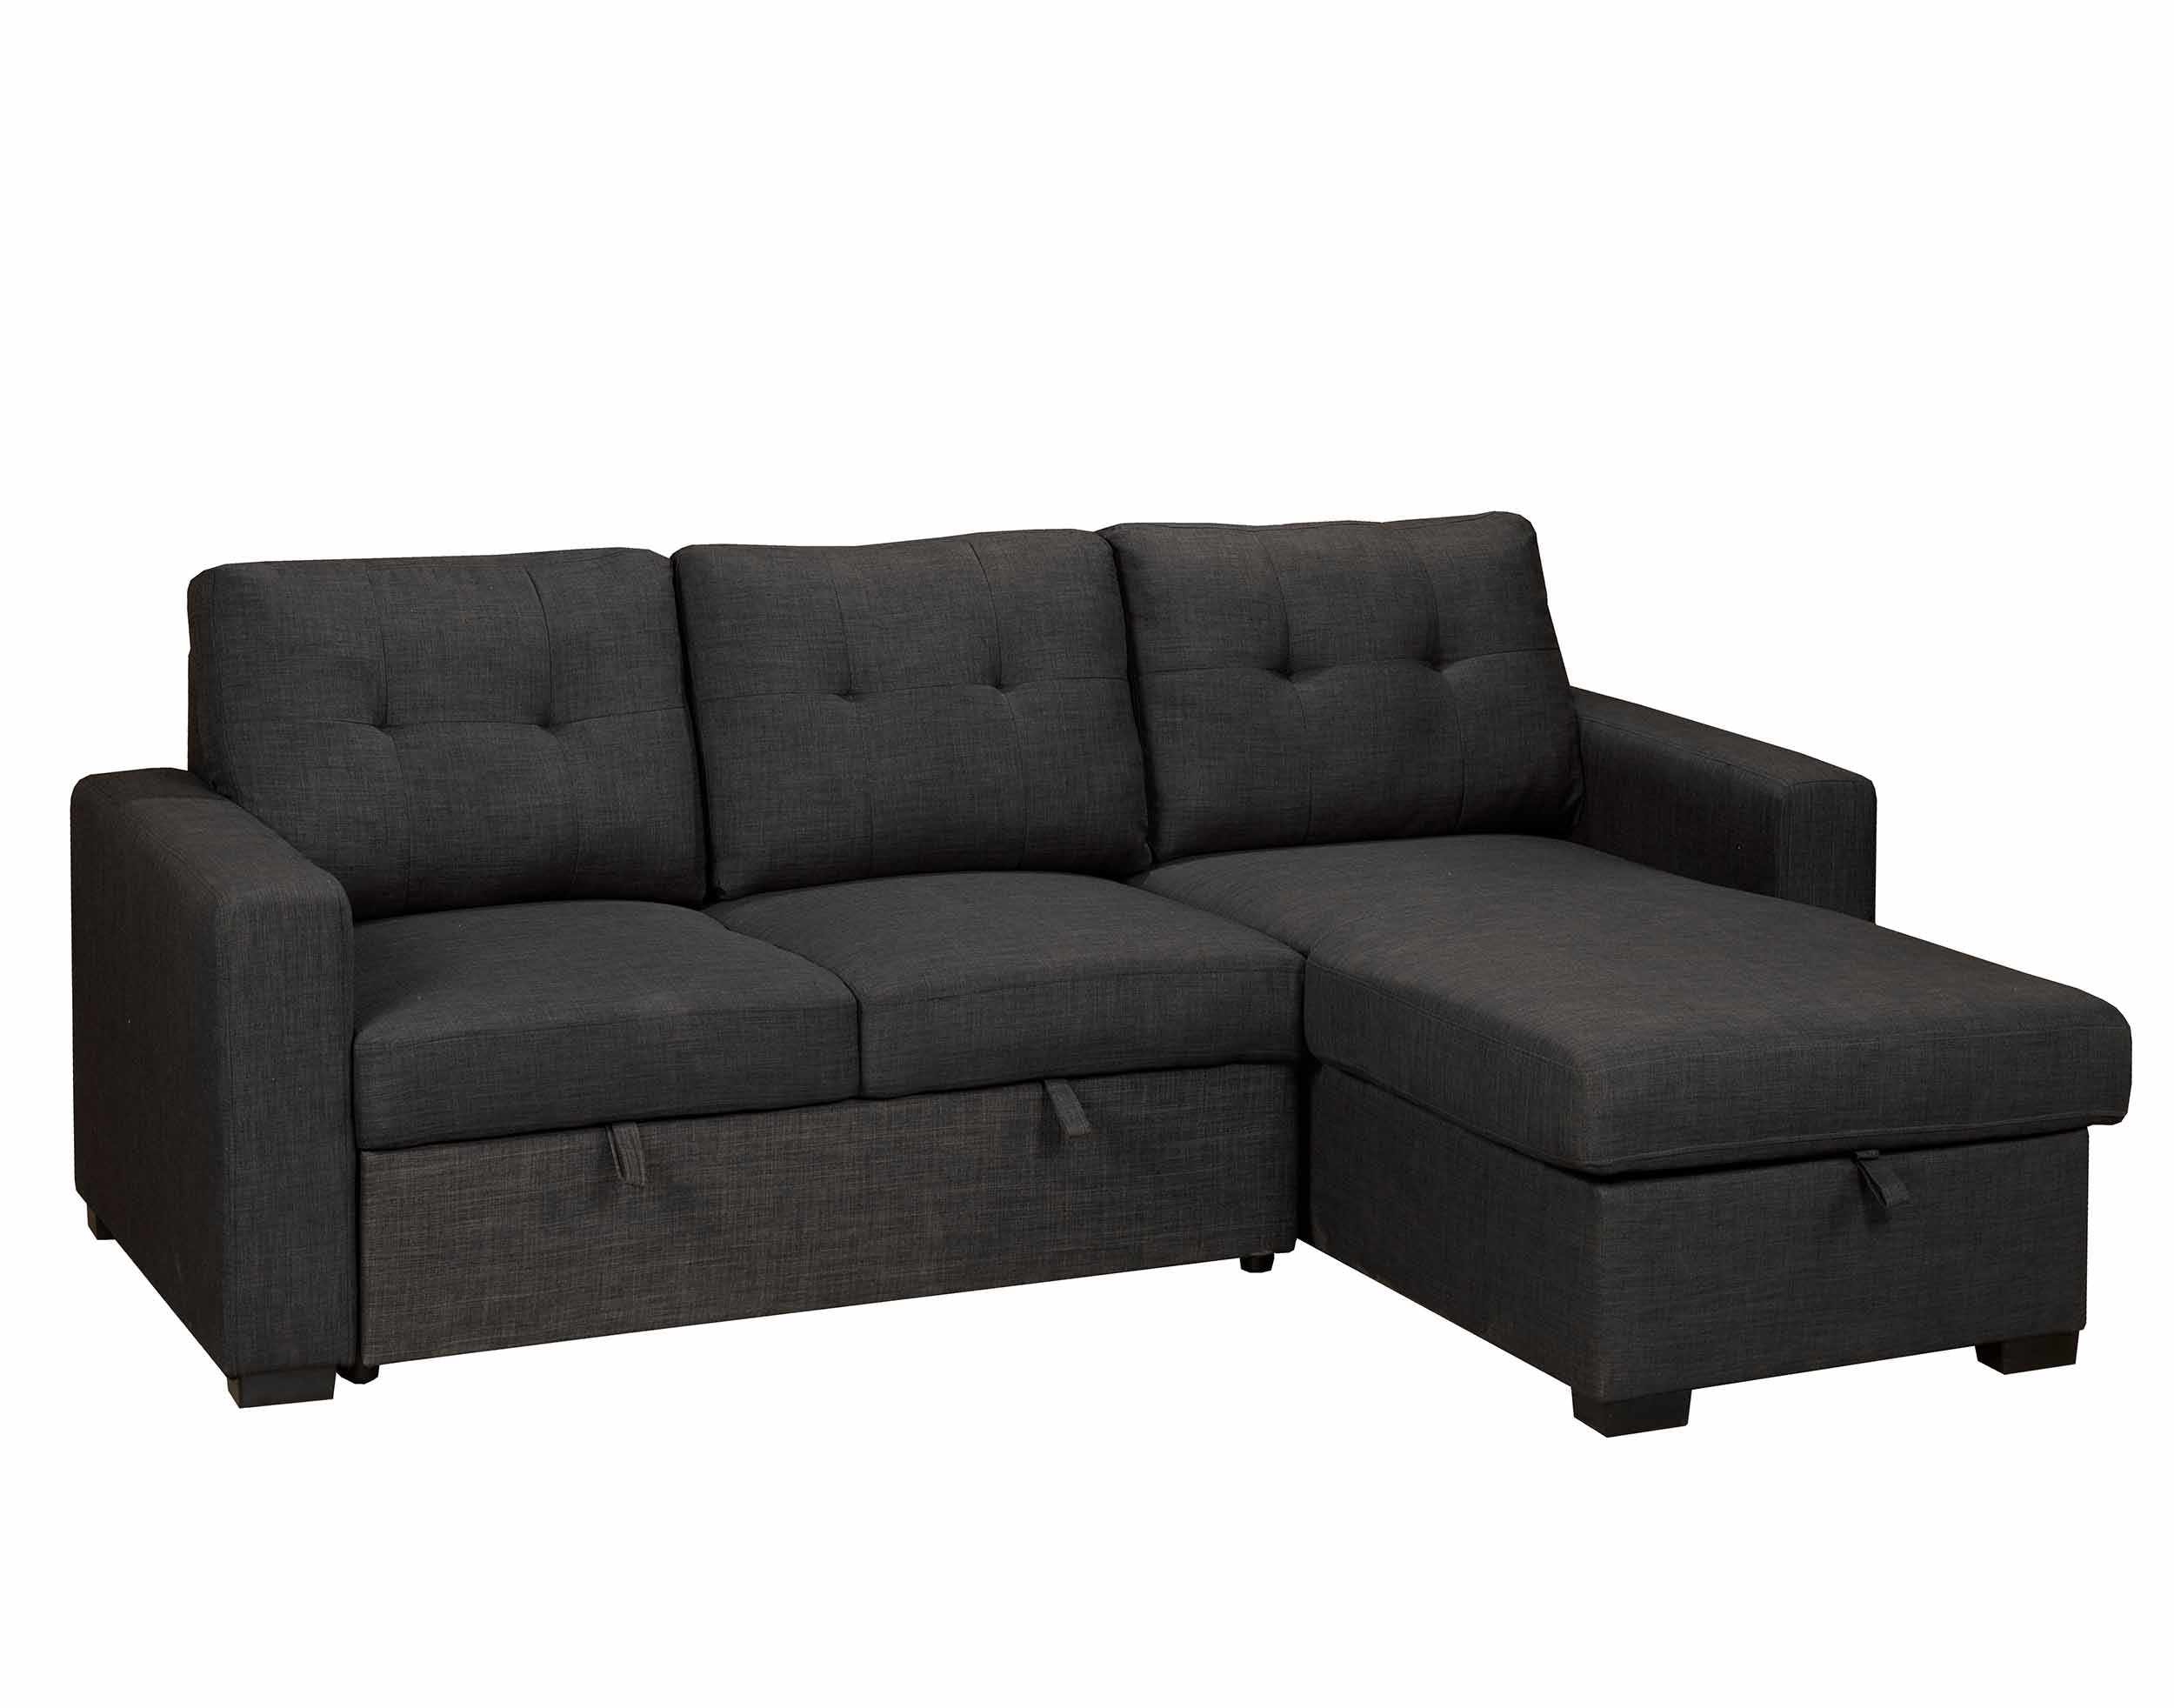 Monton Sectional Sofa Bed with Storage 5535